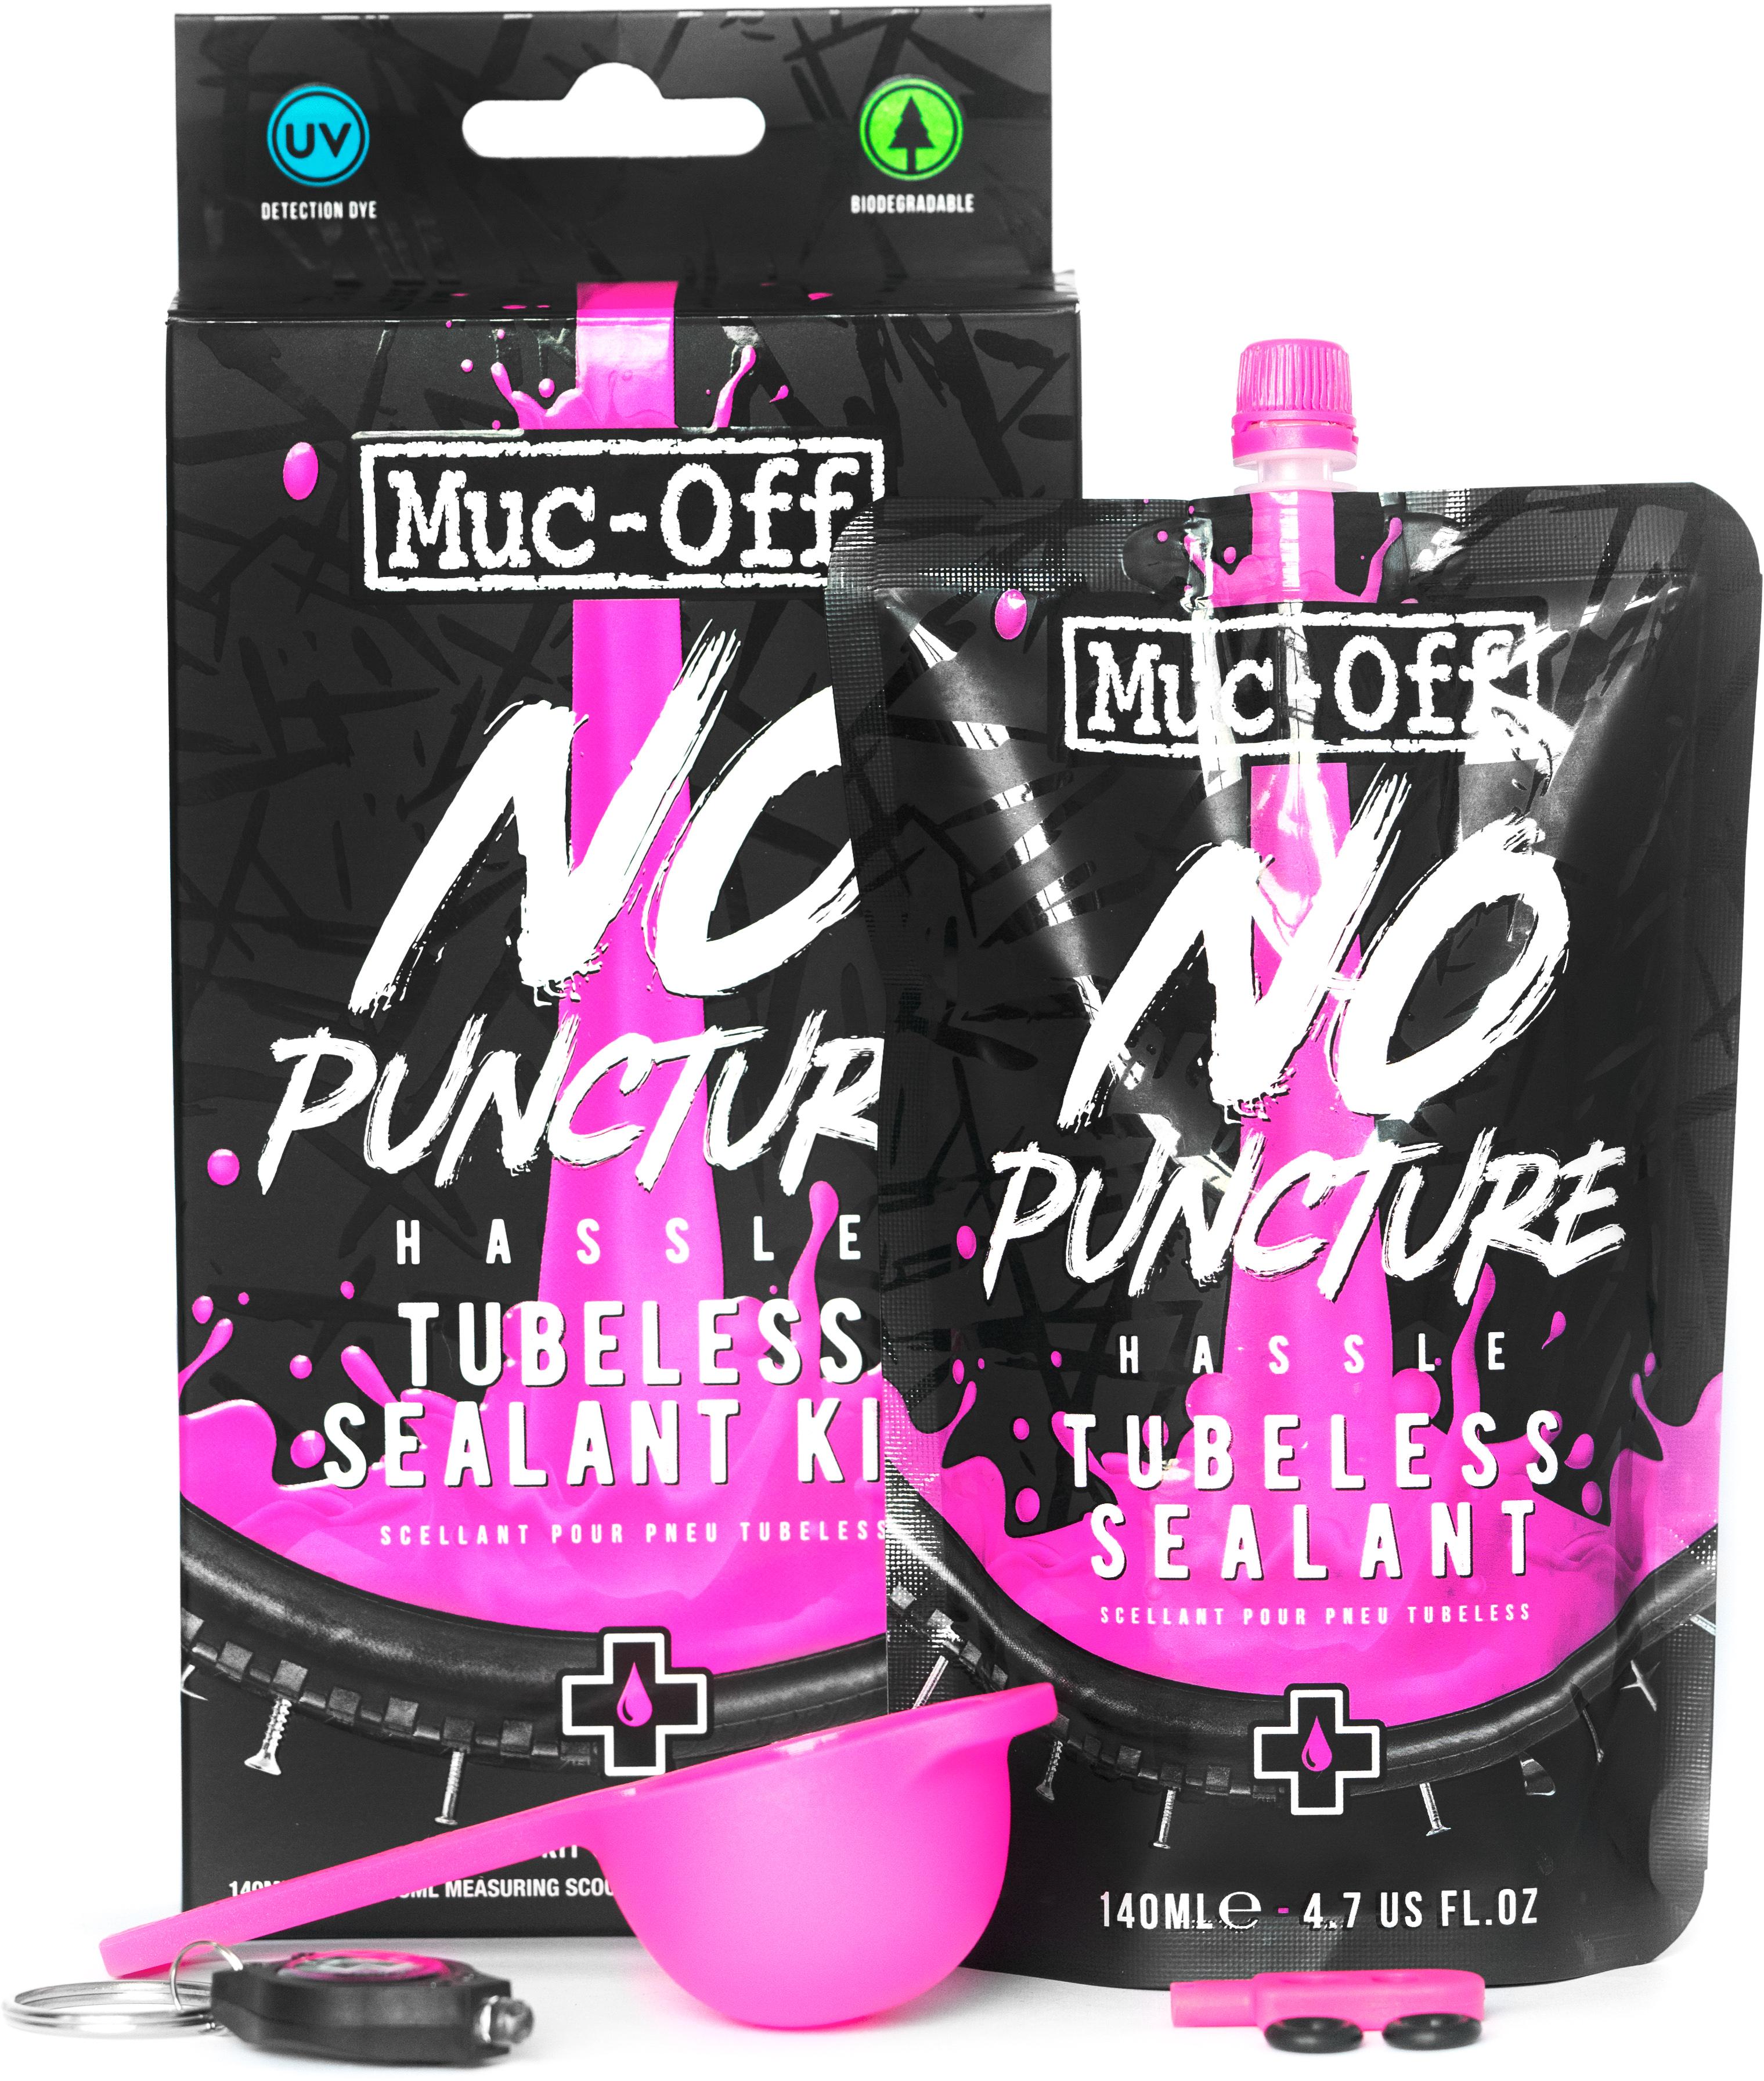 Muc-off No Puncture Hassle Kit (140ml)  Black